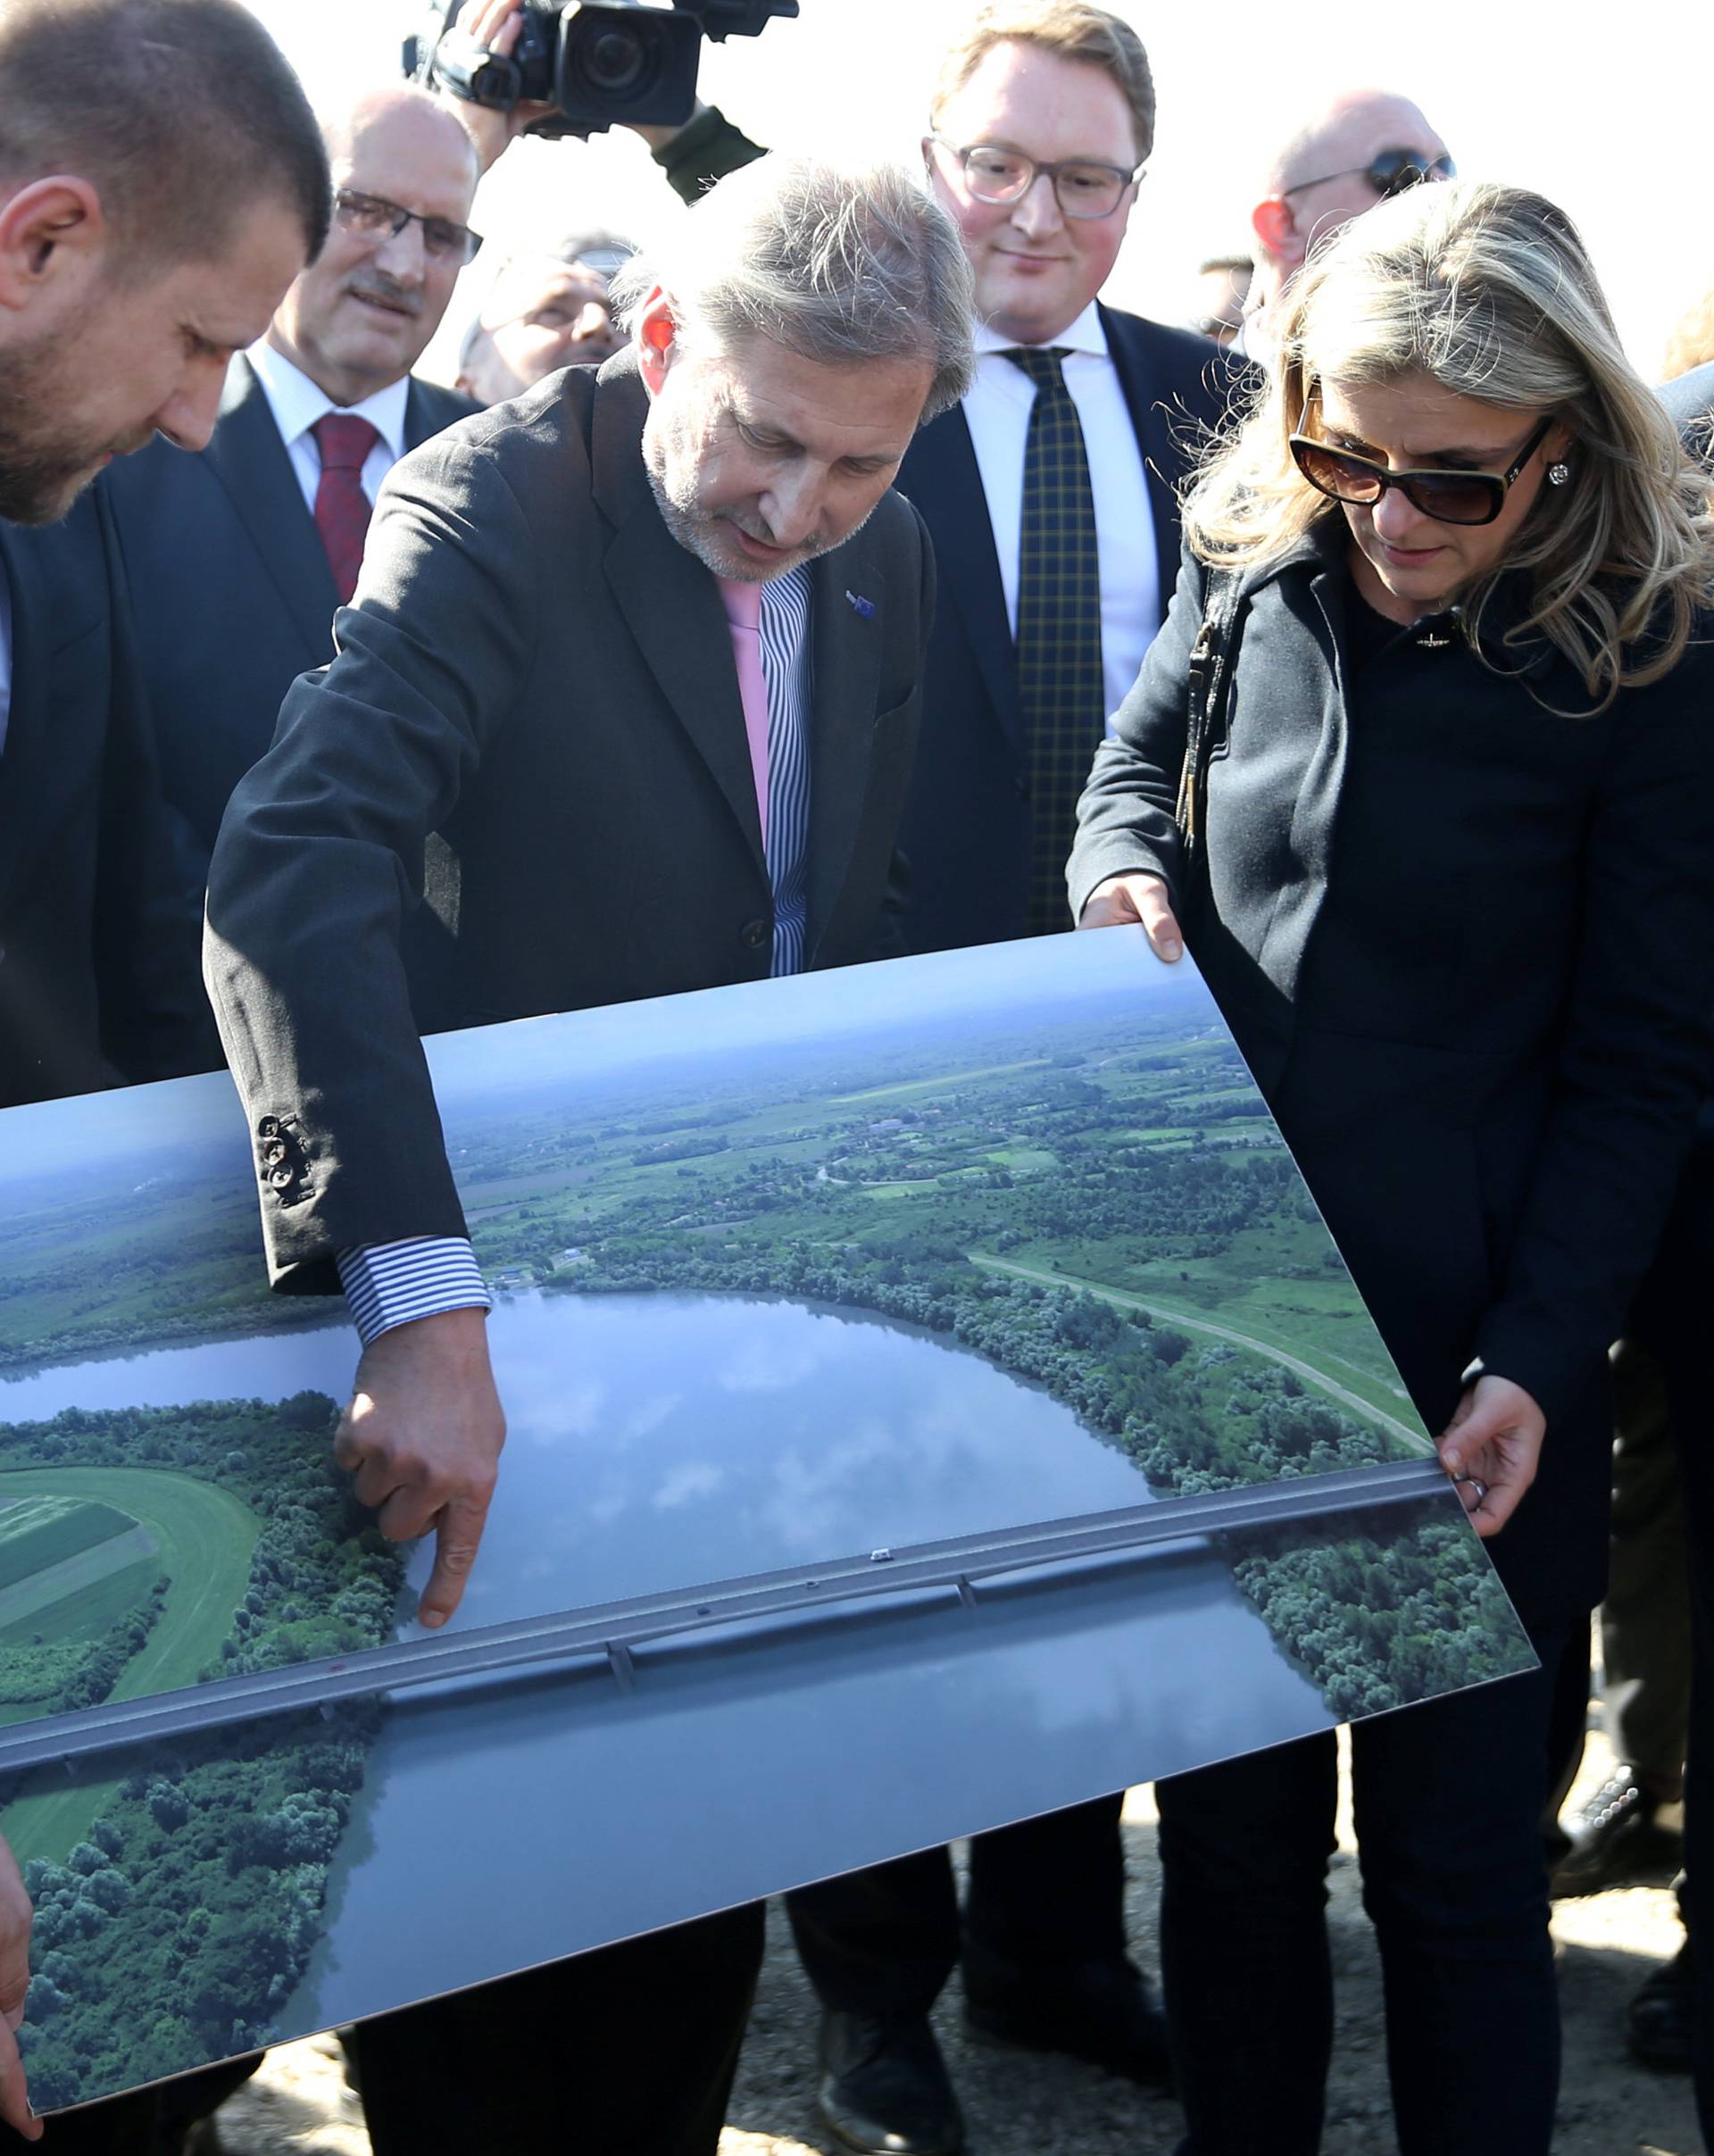 EU Enlargement Commissioner Johannes Hahn points at a picture of the EU-funded cross-border bridge as he attends the opening ceremony of the bridge, in Donji Svilaj